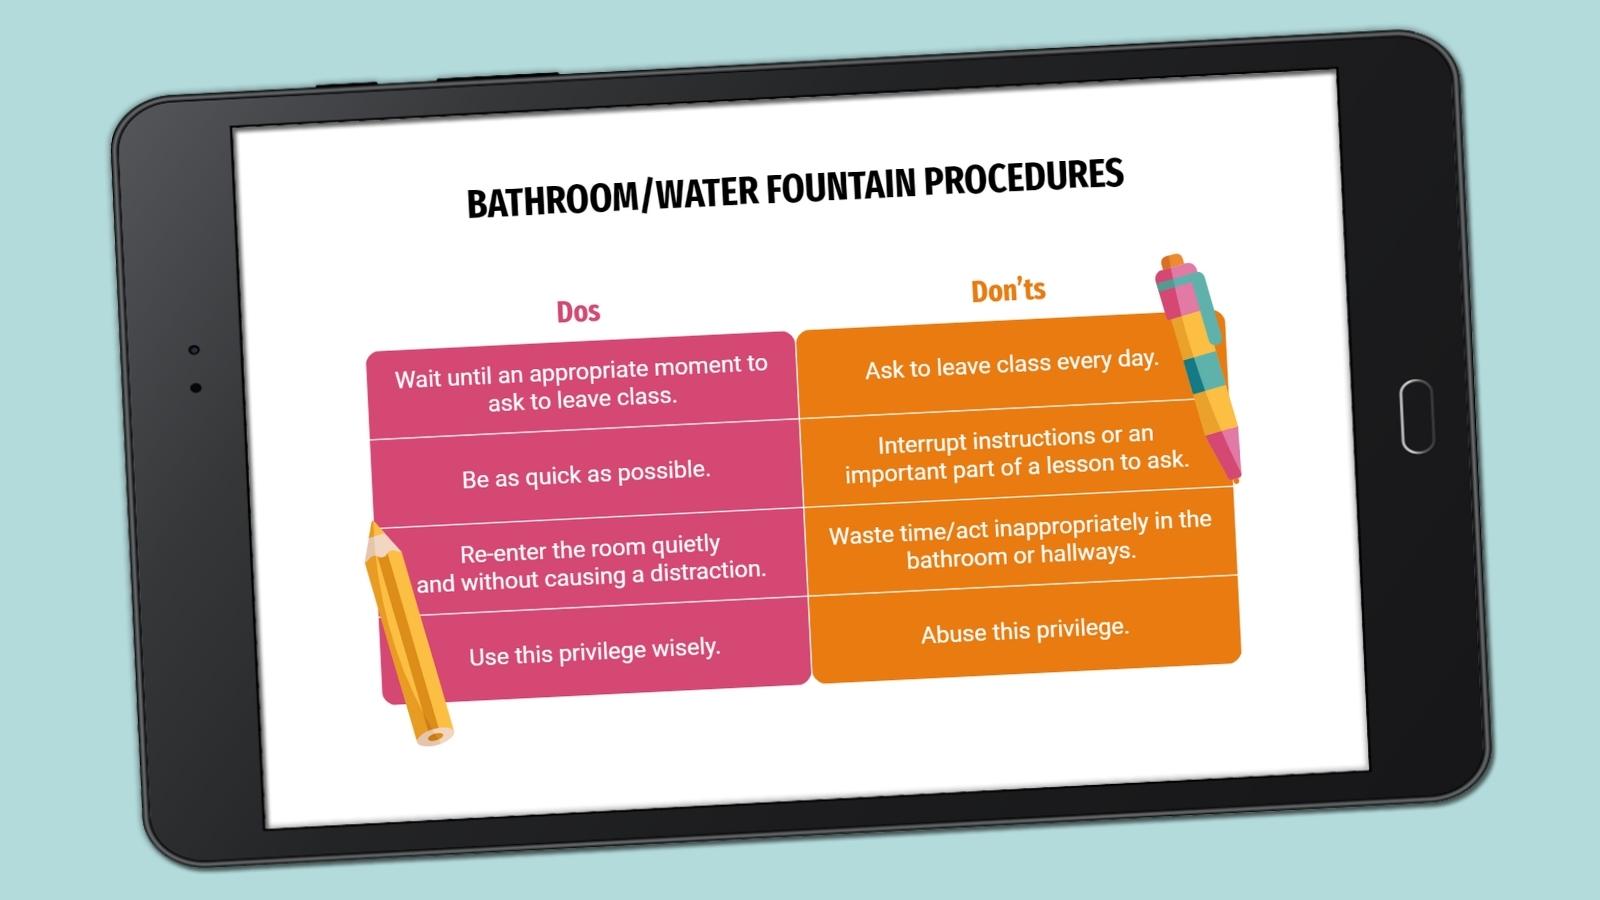 Picture of procedures for using the restroom or visiting the water fountain on a tablet